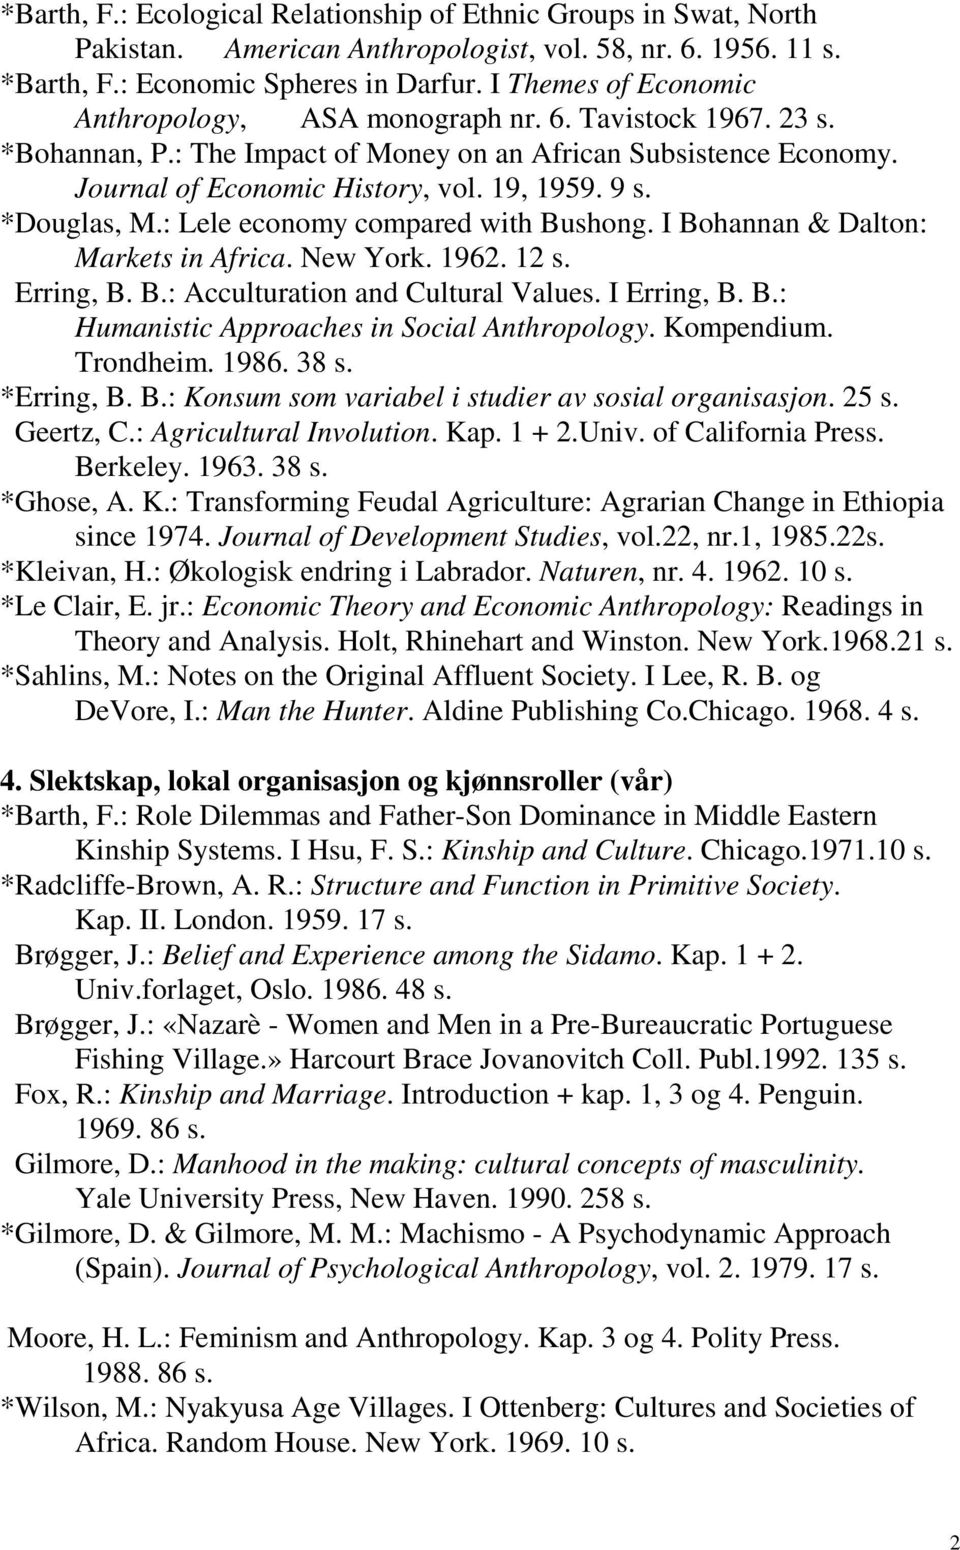 *Douglas, M.: Lele economy compared with Bushong. I Bohannan & Dalton: Markets in Africa. New York. 1962. 12 s. Erring, B. B.: Acculturation and Cultural Values. I Erring, B. B.: Humanistic Approaches in Social Anthropology.